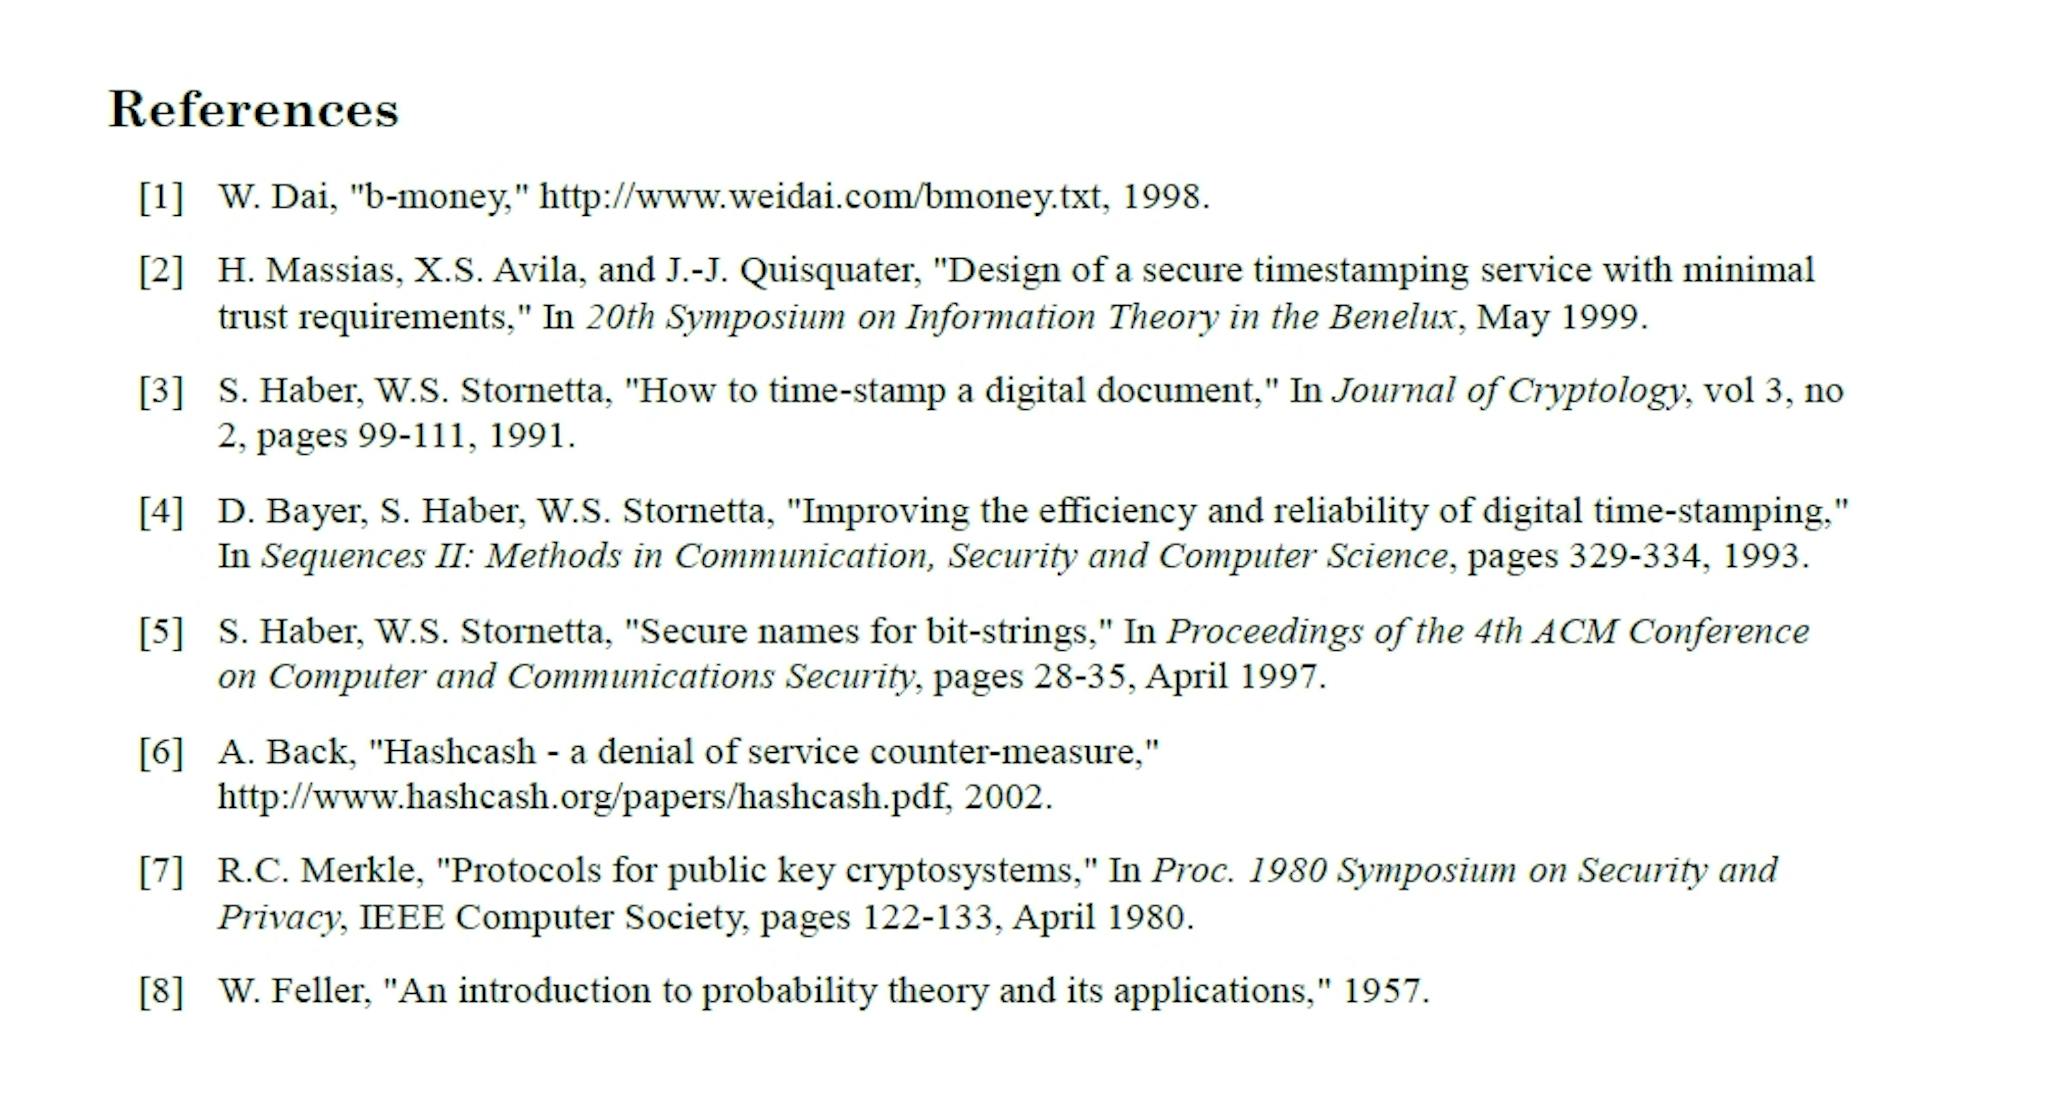 References in the Bitcoin whitepaper